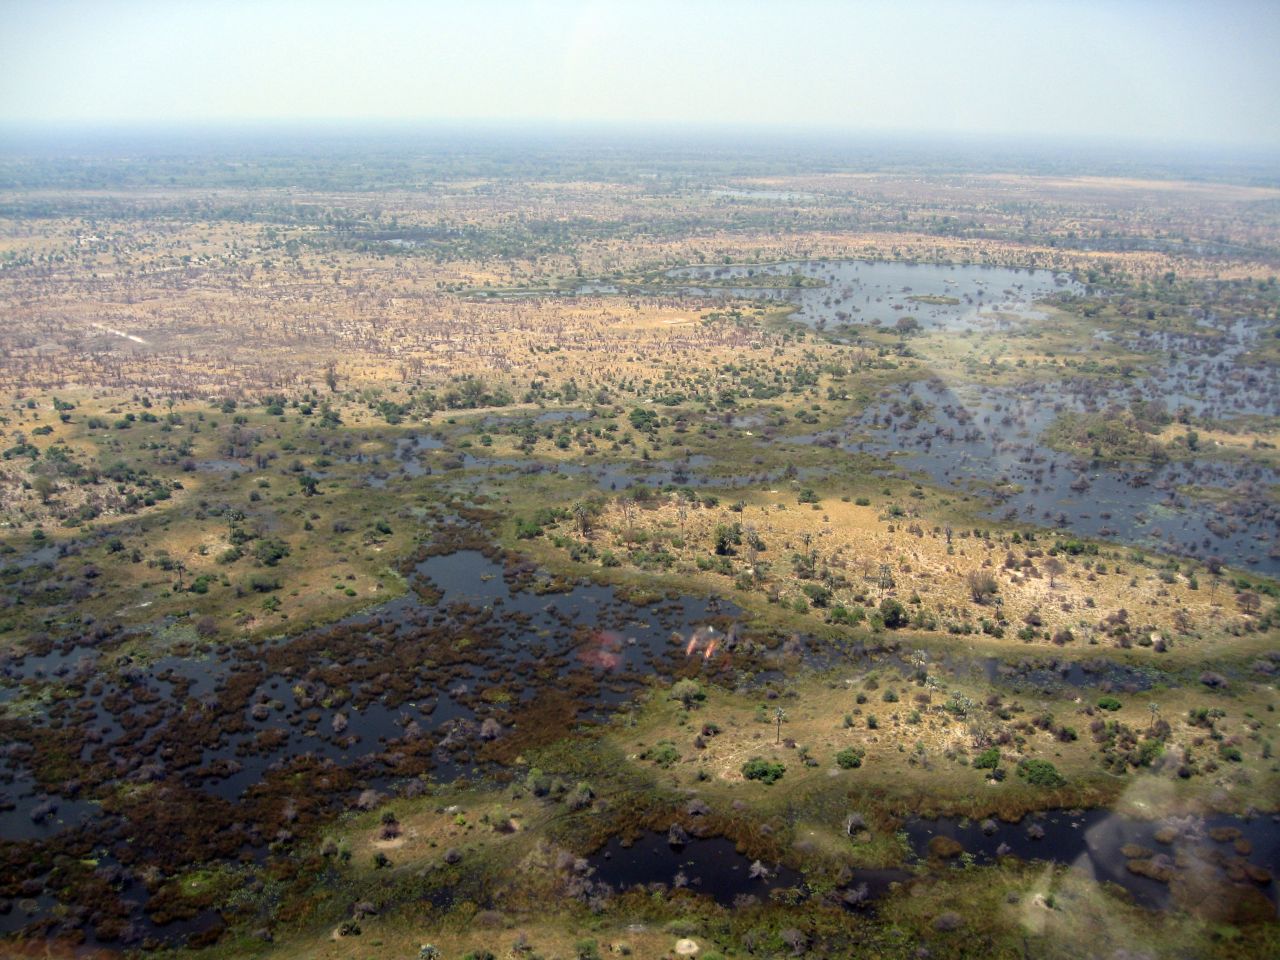 Thousands of tourists go on safari expeditions in Botswana's Okavango Delta every year.